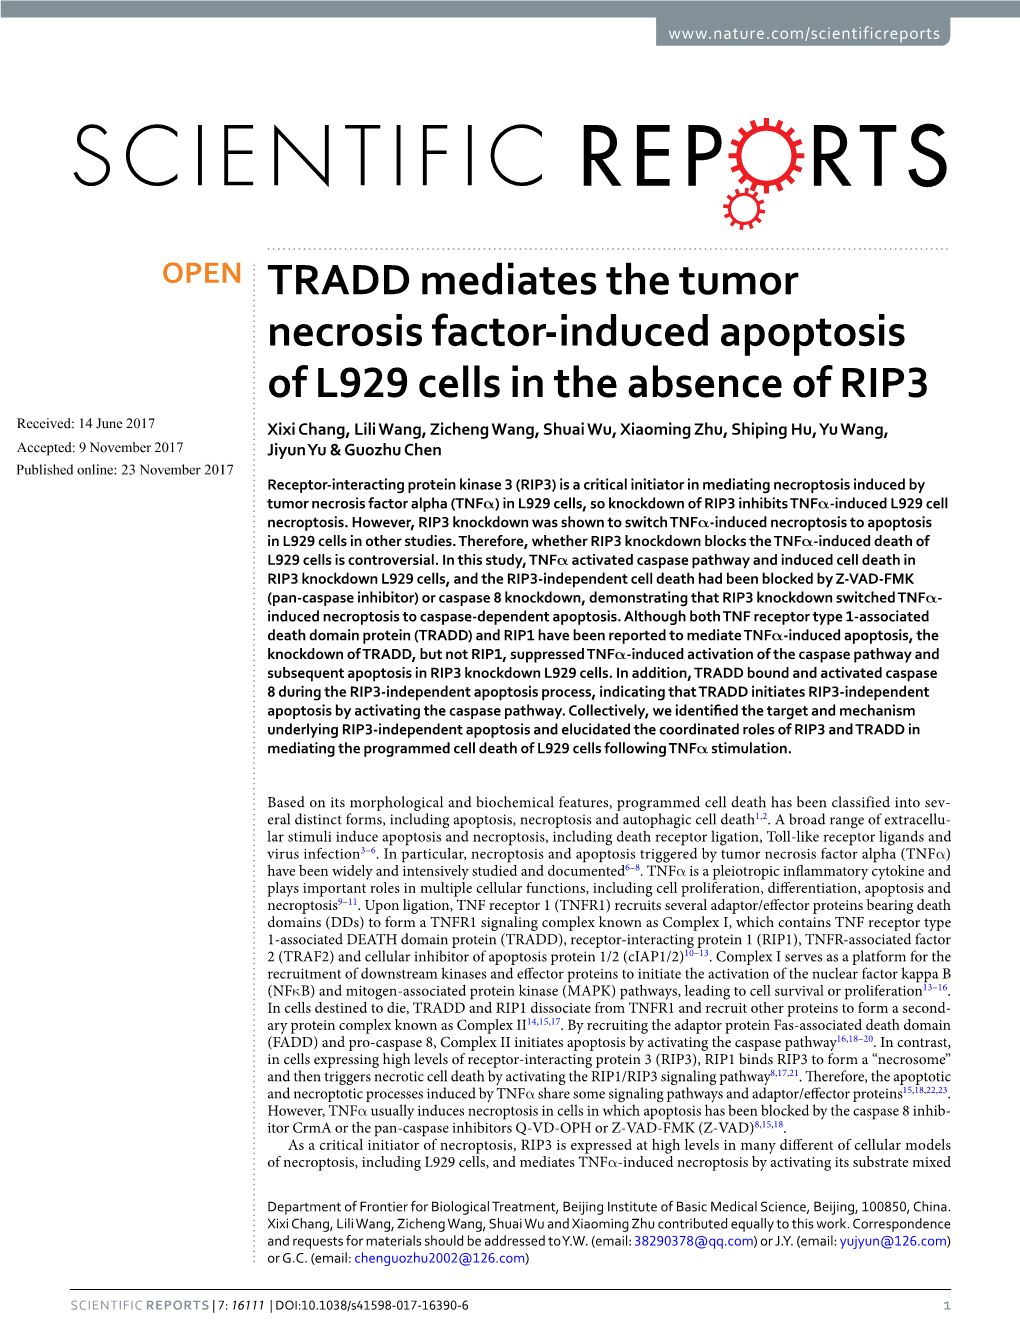 TRADD Mediates the Tumor Necrosis Factor-Induced Apoptosis of L929